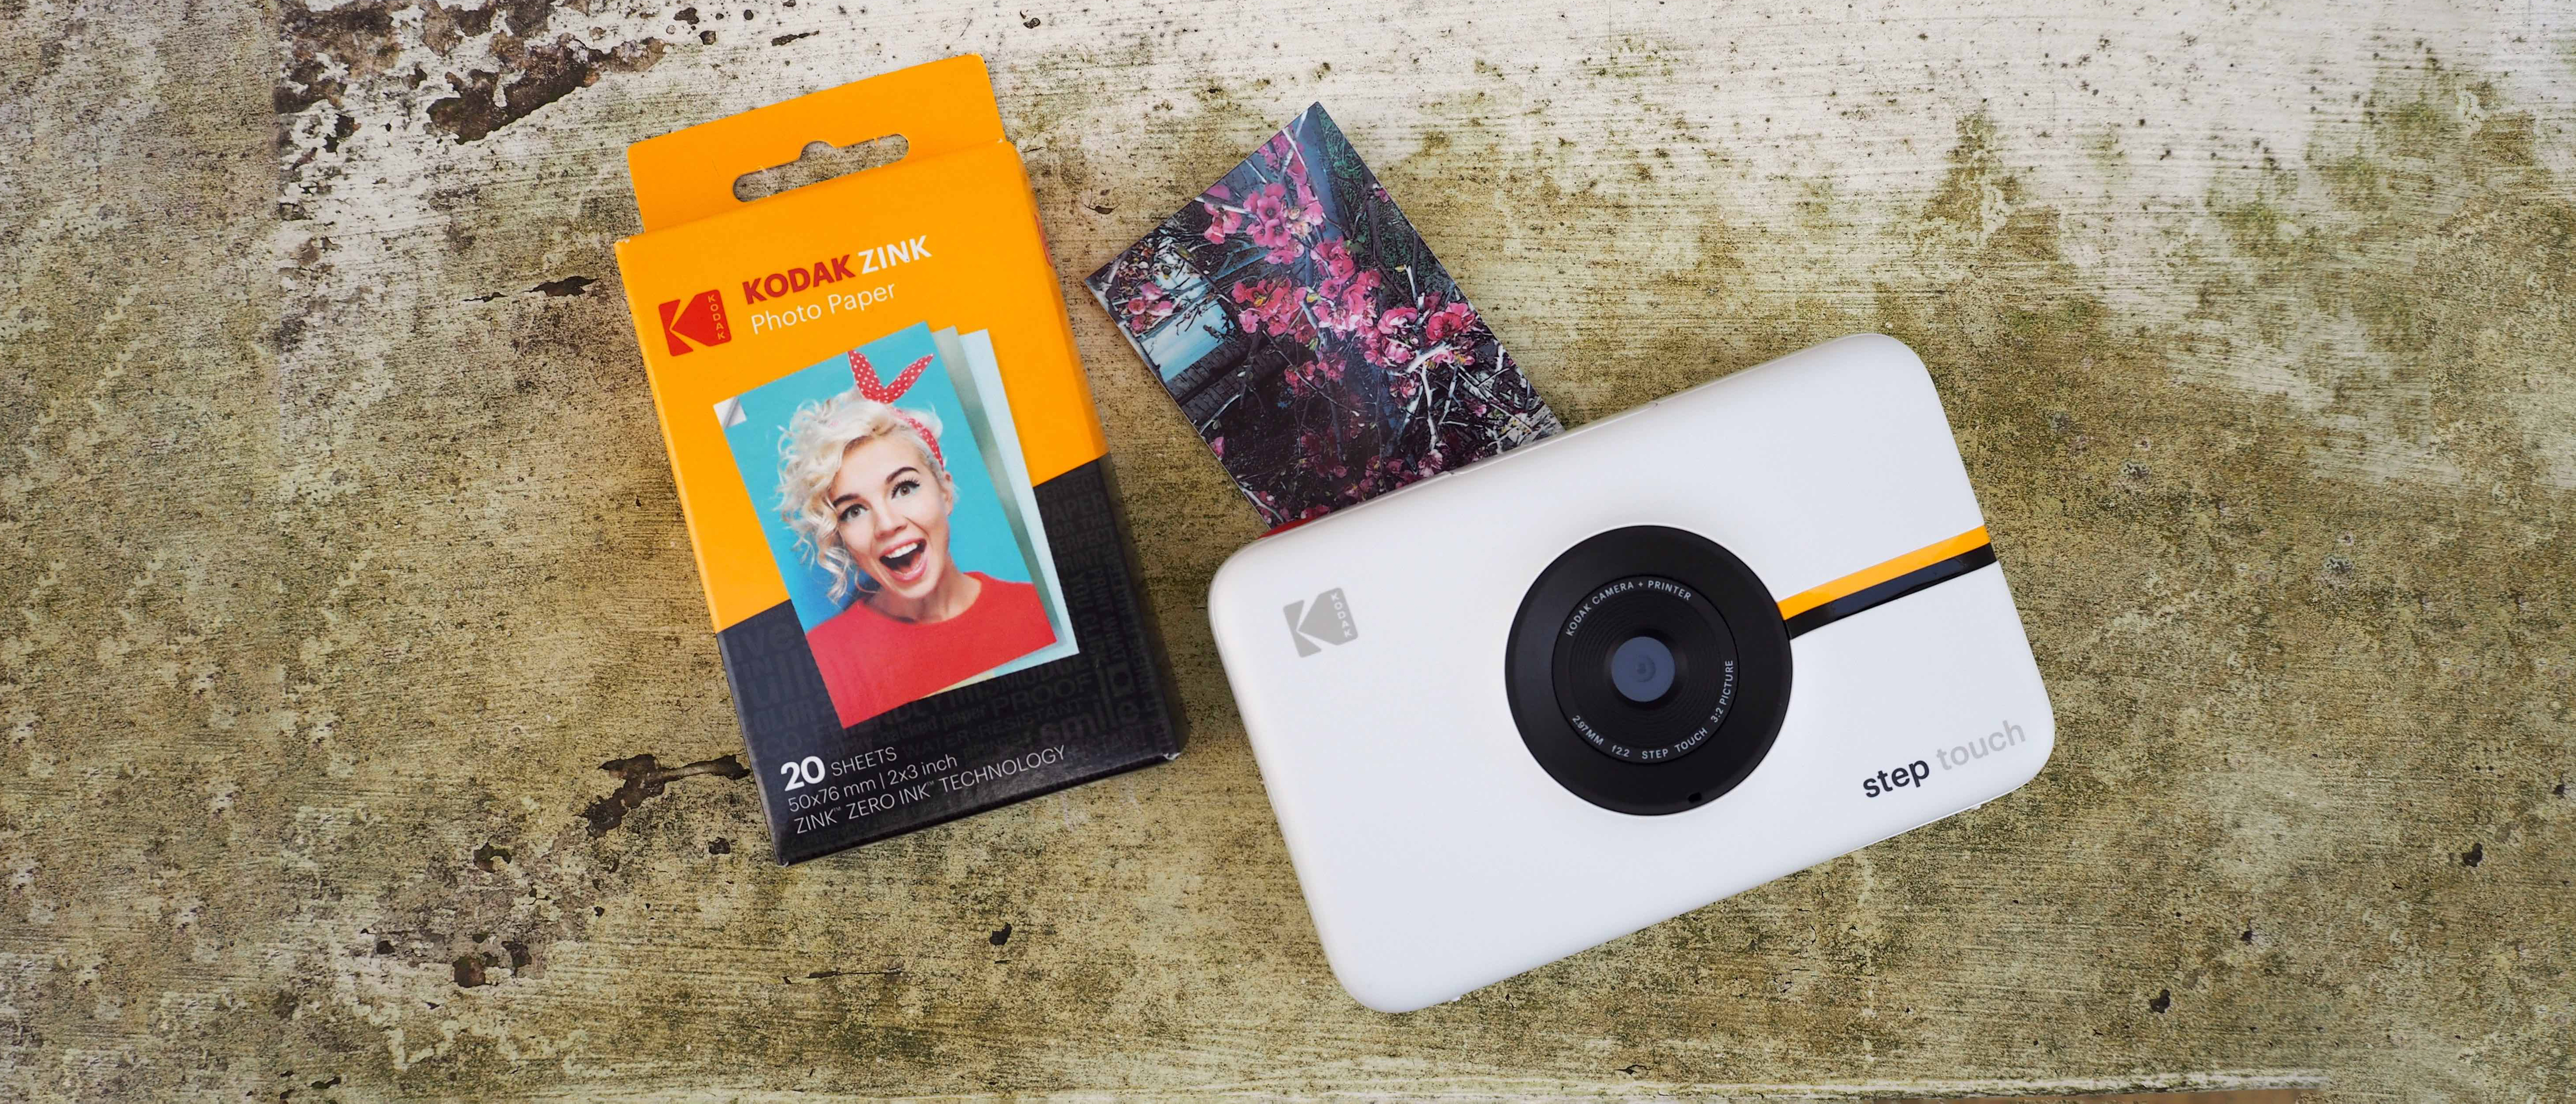 The Kodak Step Touch instant camera does more than just print